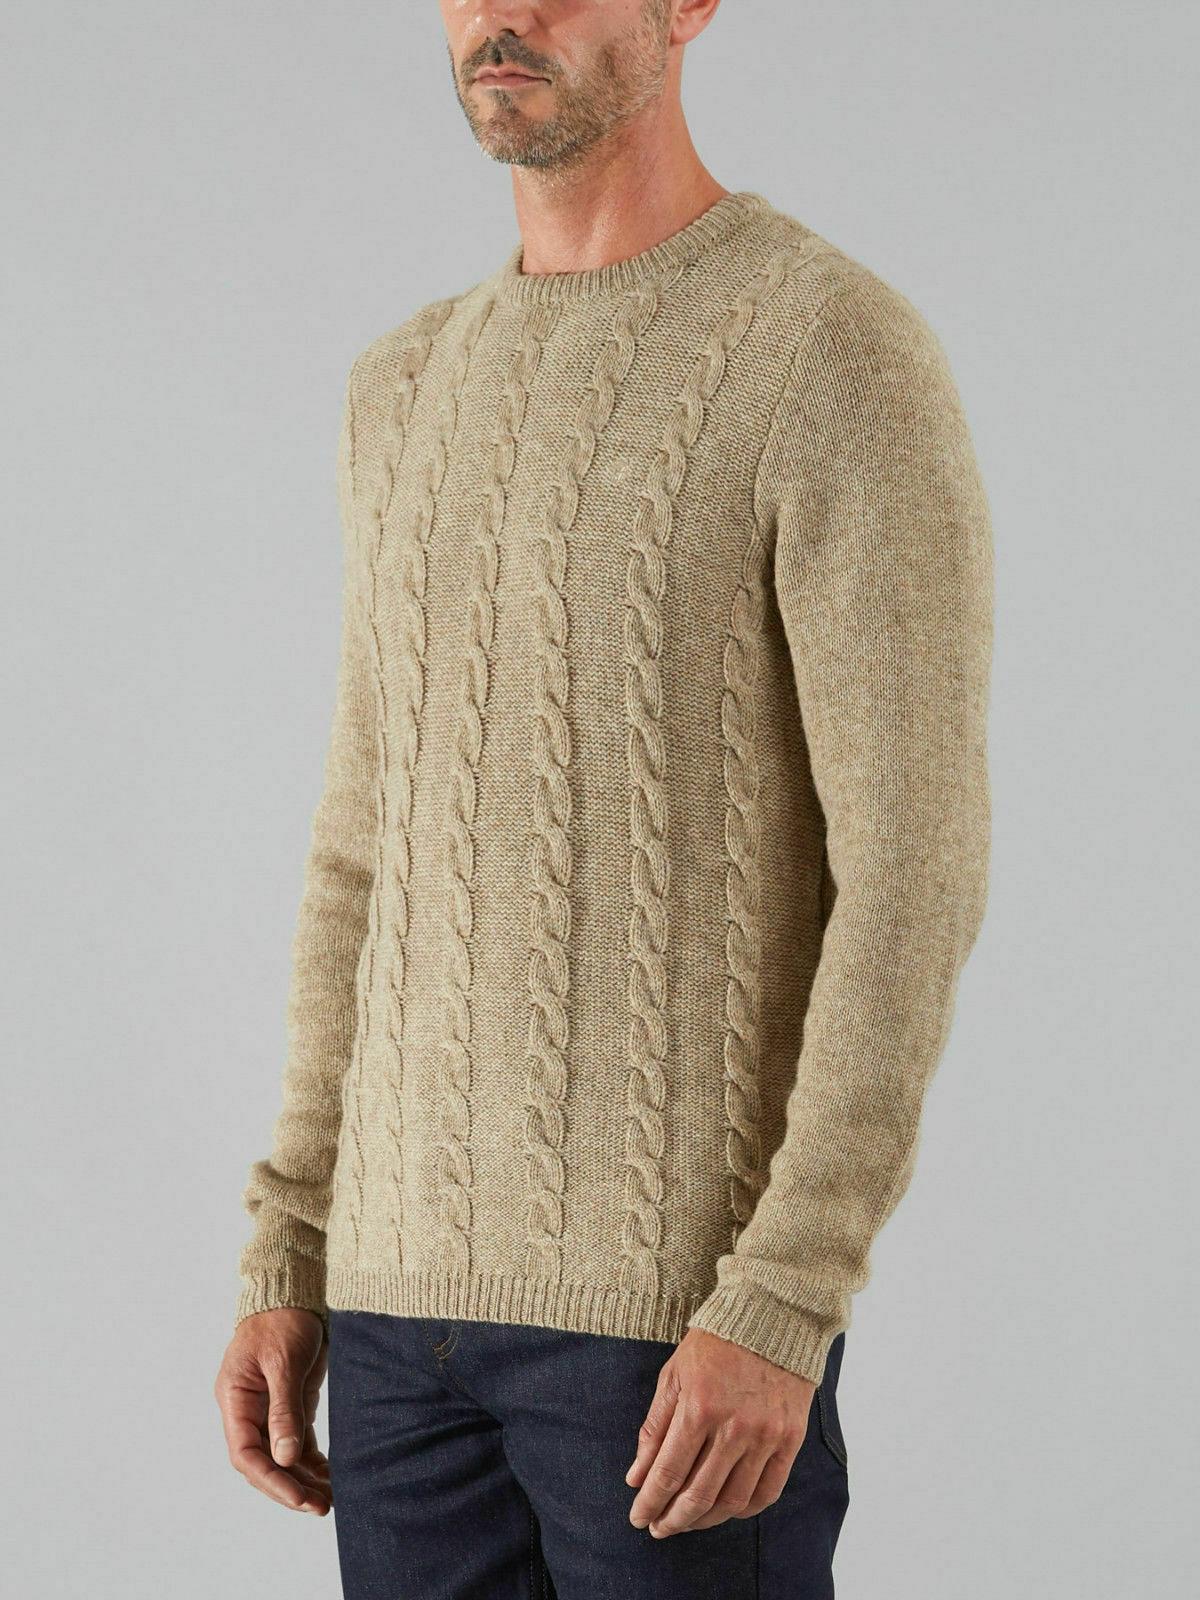 Farah TOPLEY khaki lambswool marl cable knit pattern front crew neck jumper